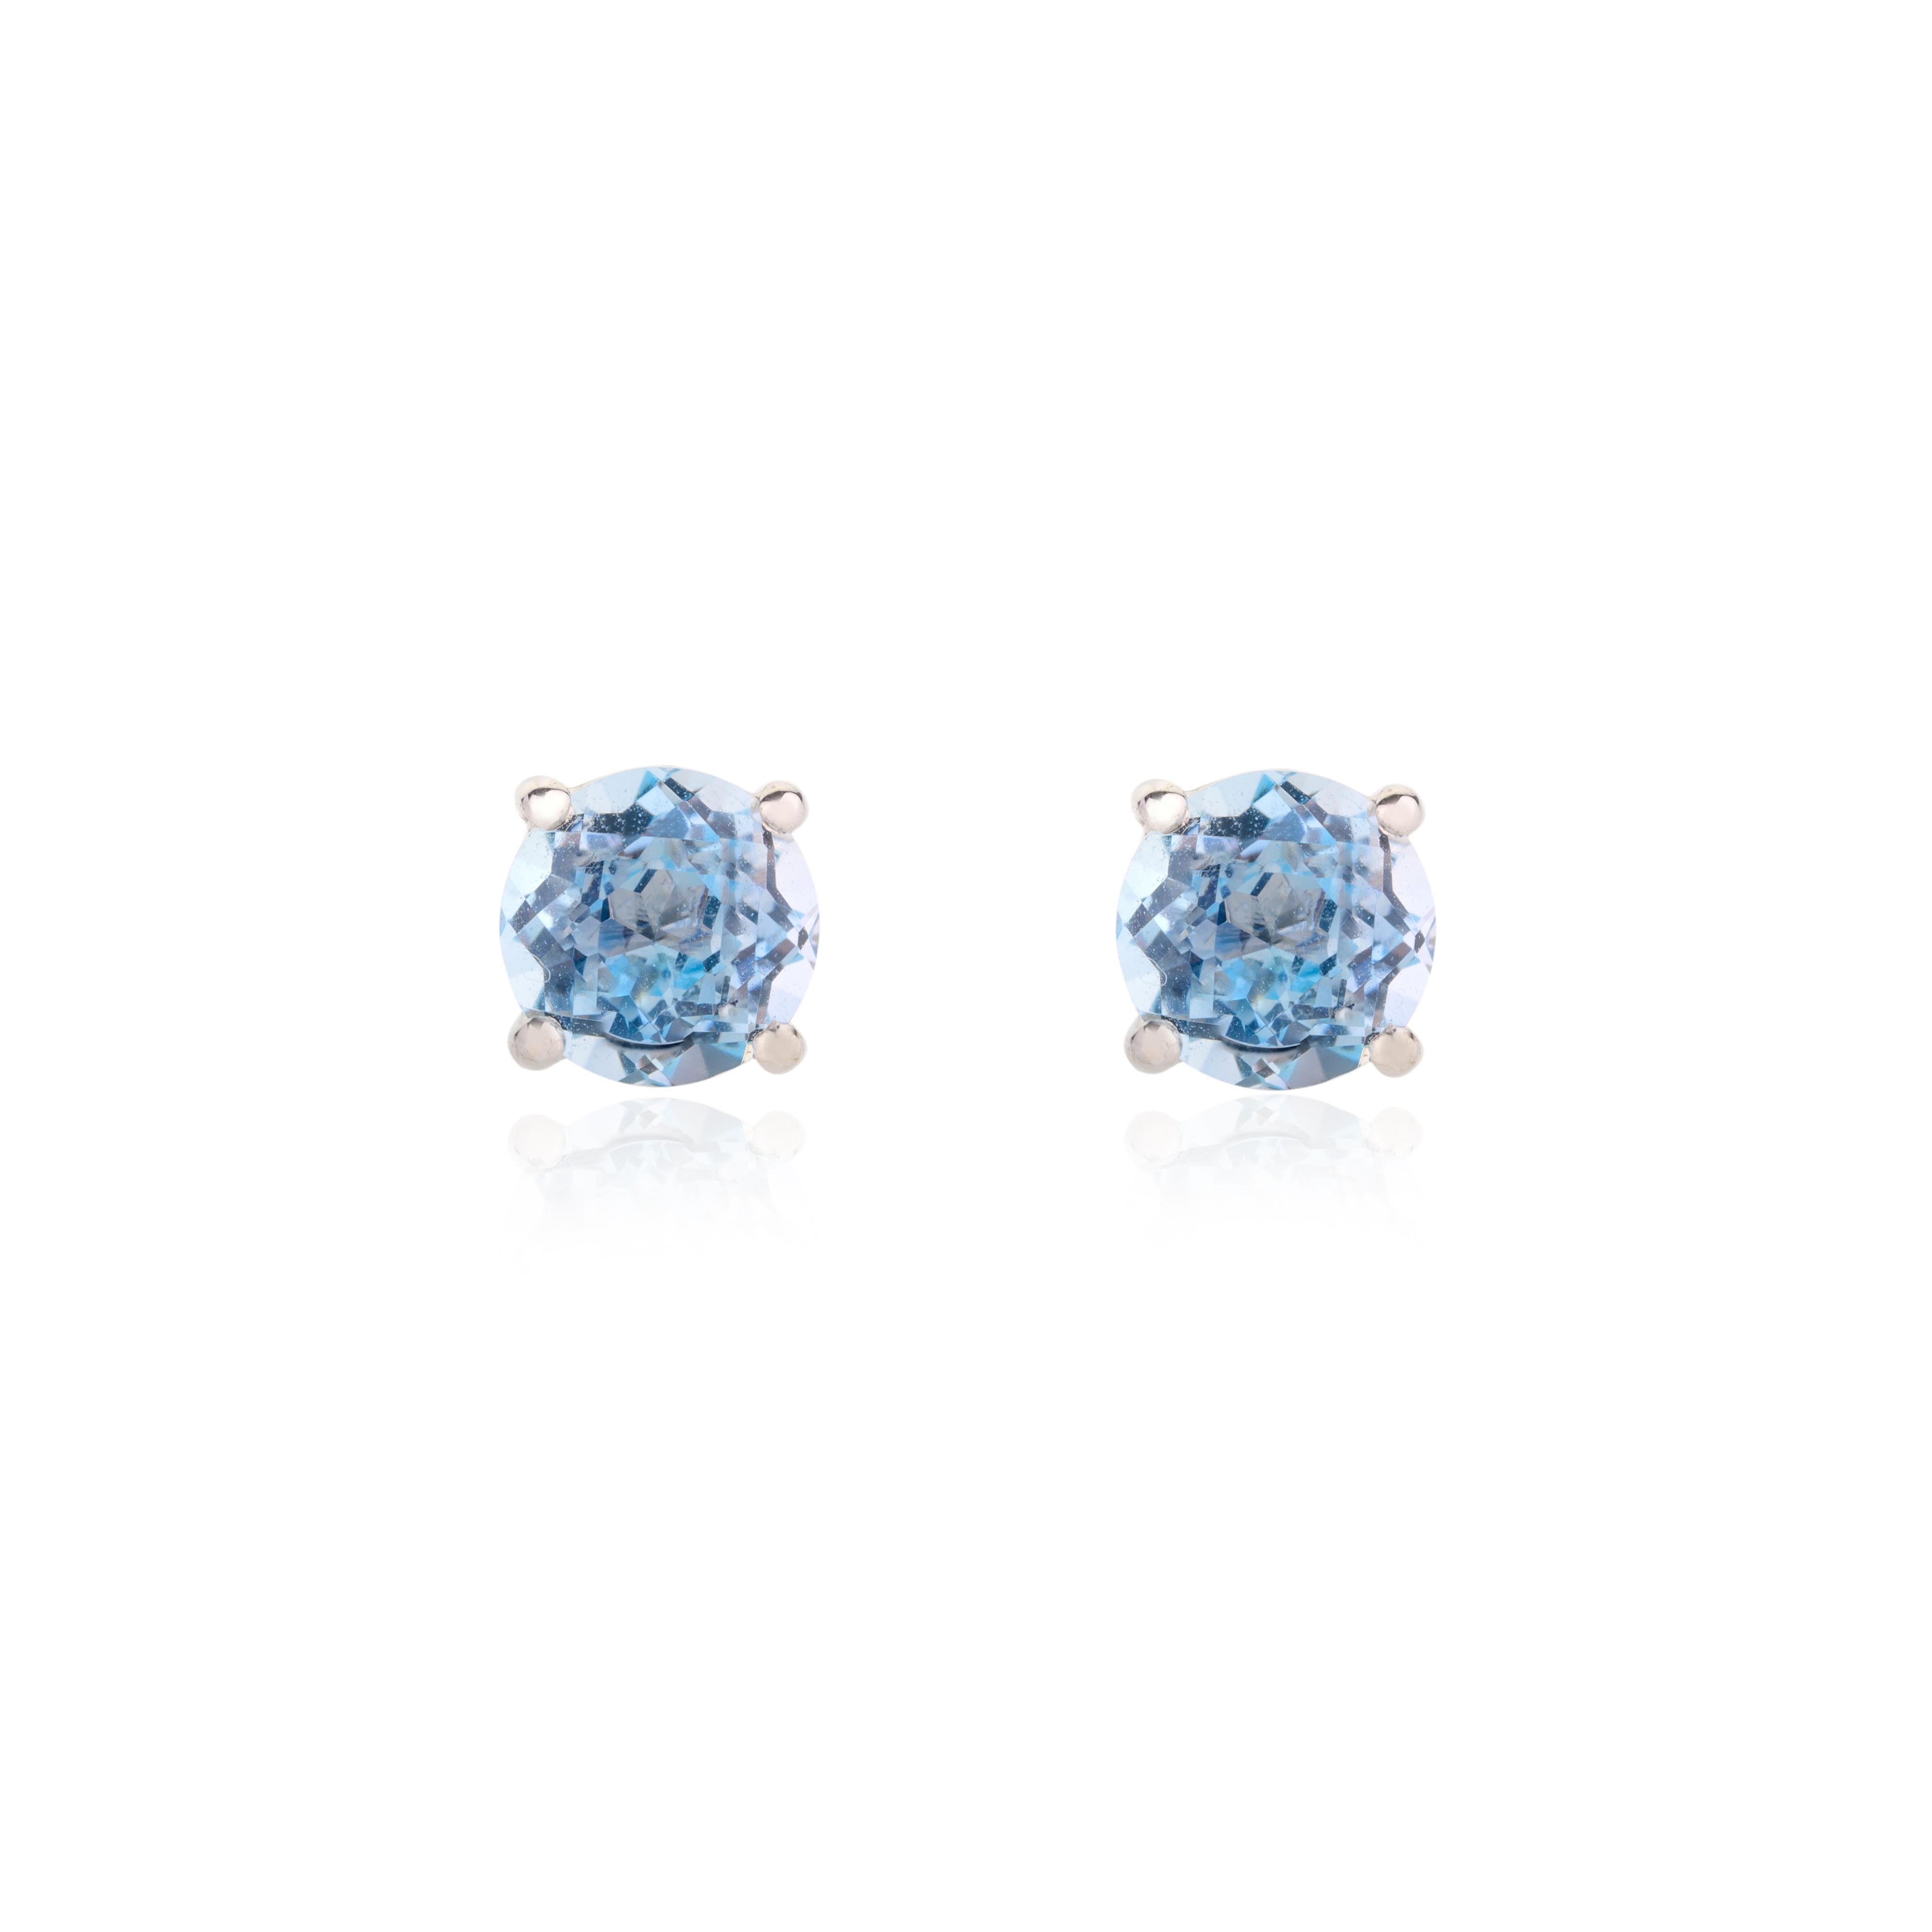 Enchanting 14k Solid White Gold Dainty Round Blue Topaz Stud Earrings For Sale 1